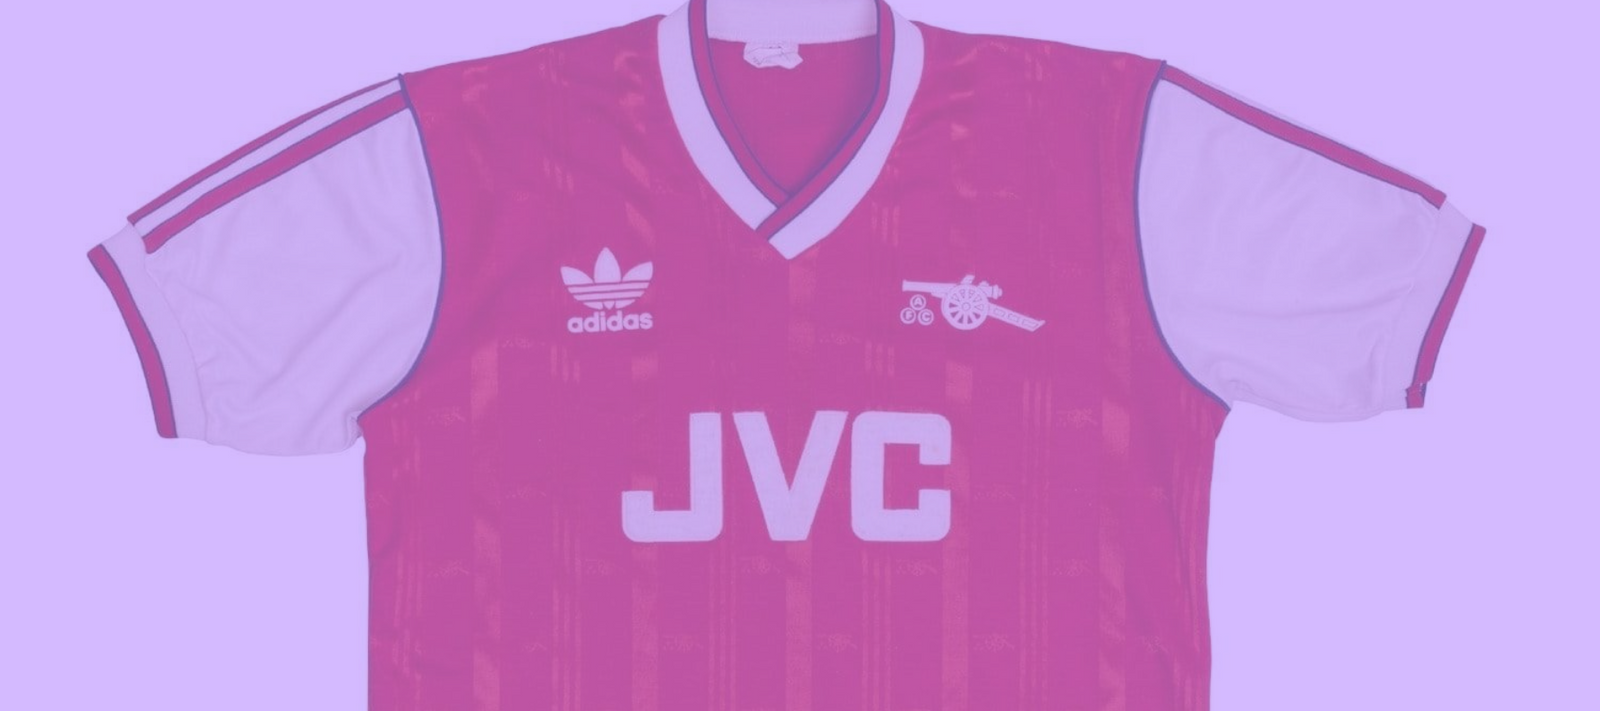 Arsenal re-release 'bruised banana' away kit and get Wright